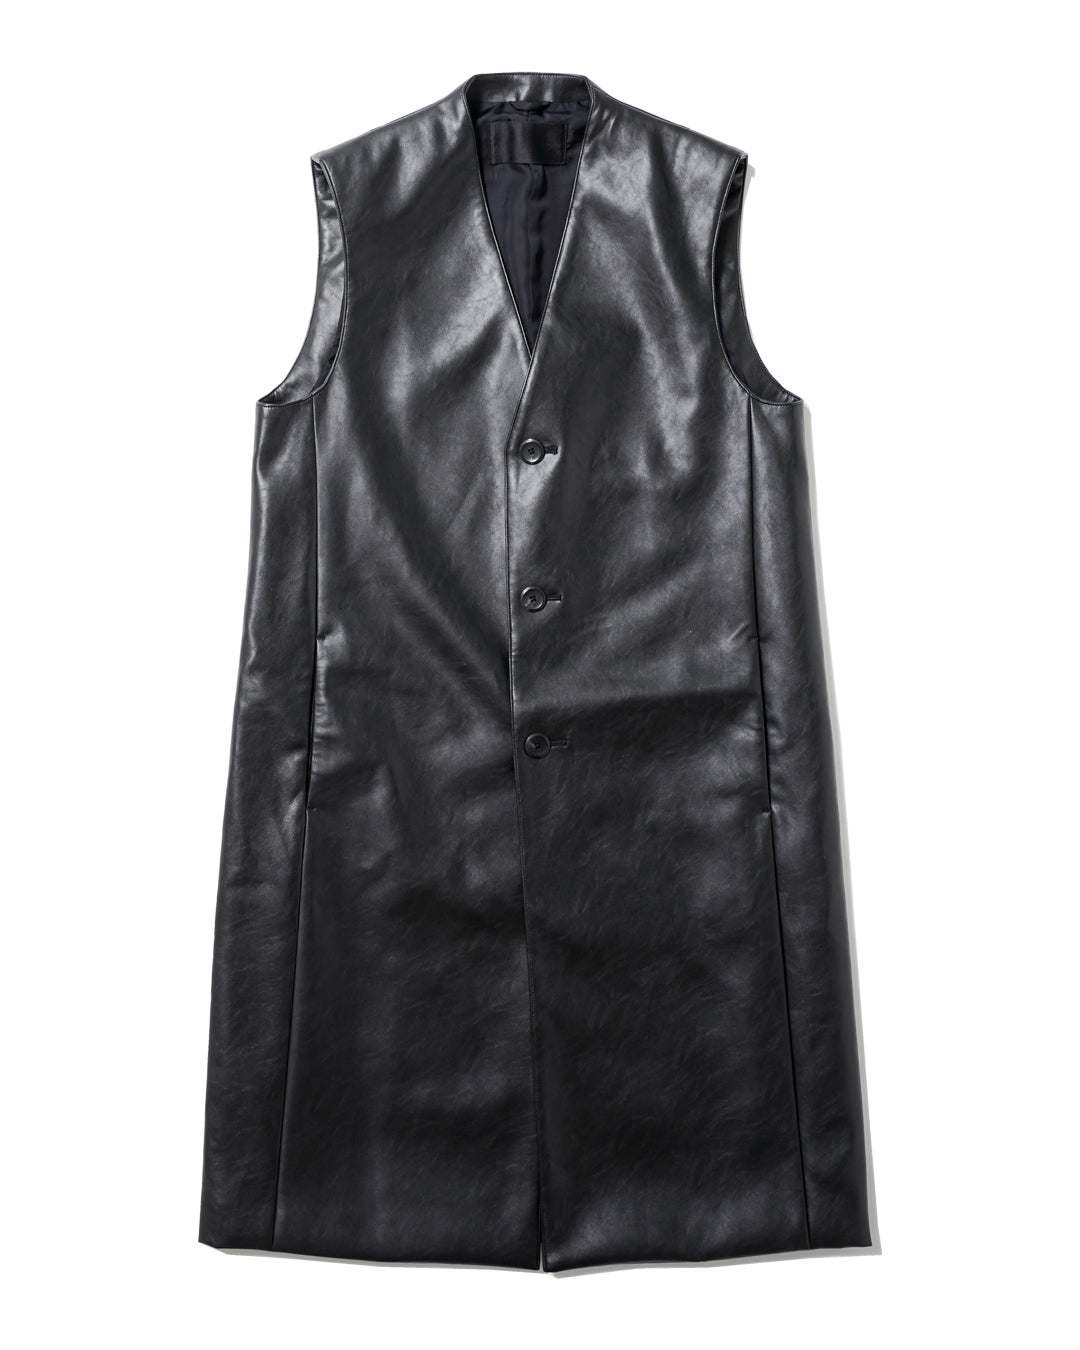 SYNTHETIC LEATHER SLEEVELESS COAT - Baby's all right